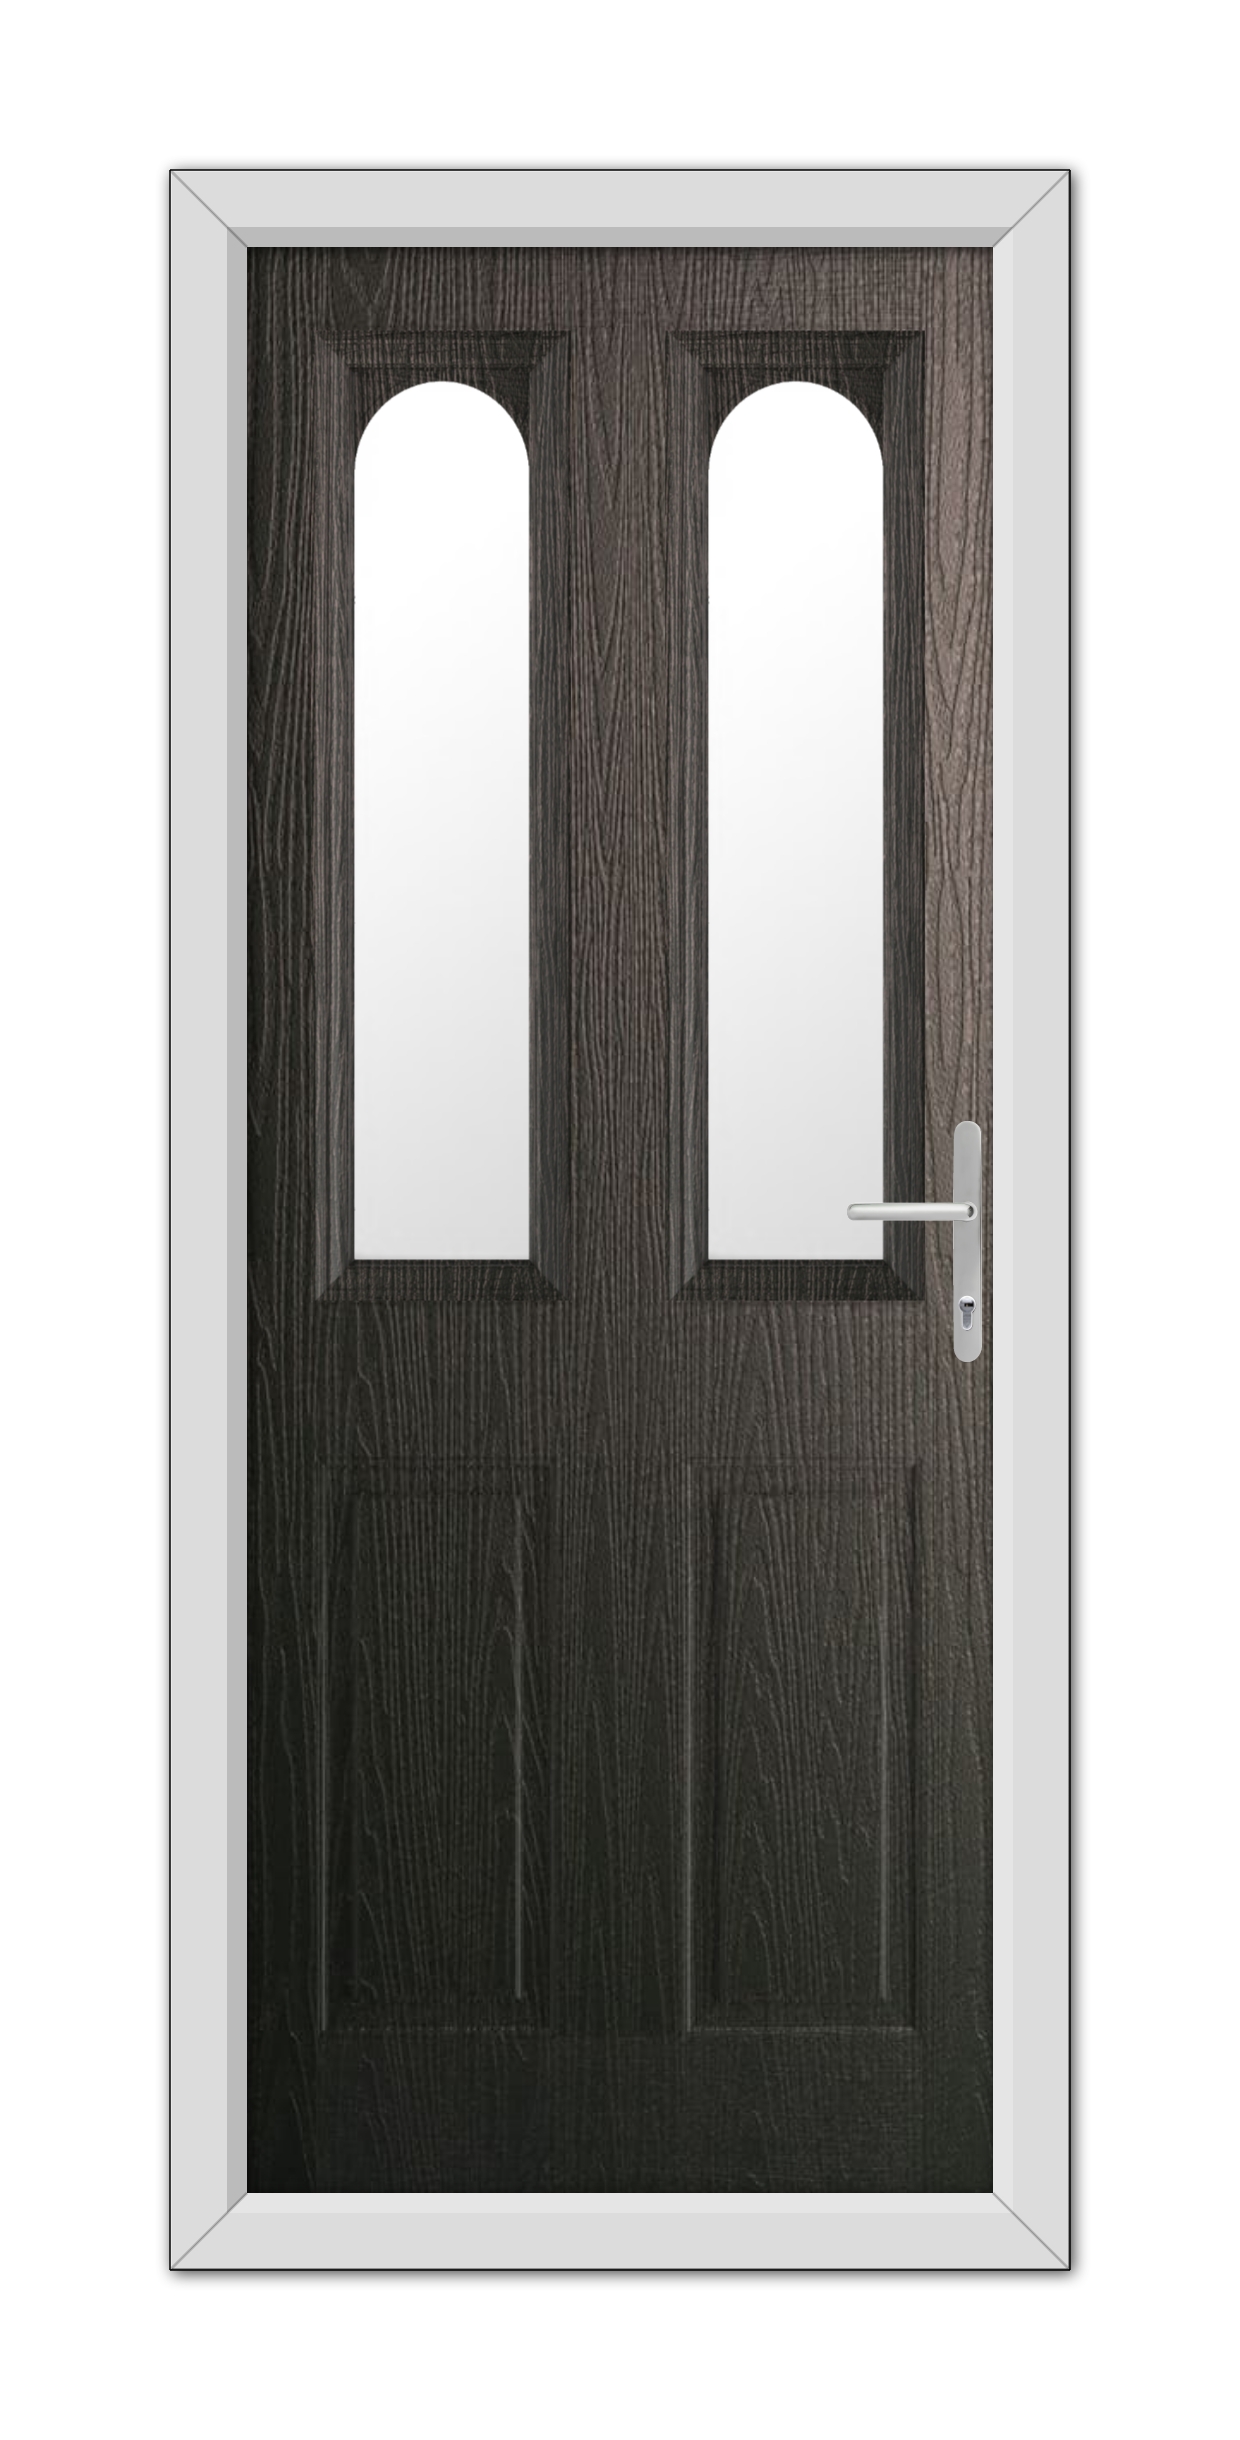 A modern Schwarzbraun Elmhurst Composite Door 48mm Timber Core featuring two vertical glass panels and a silver handle, set within a white frame.